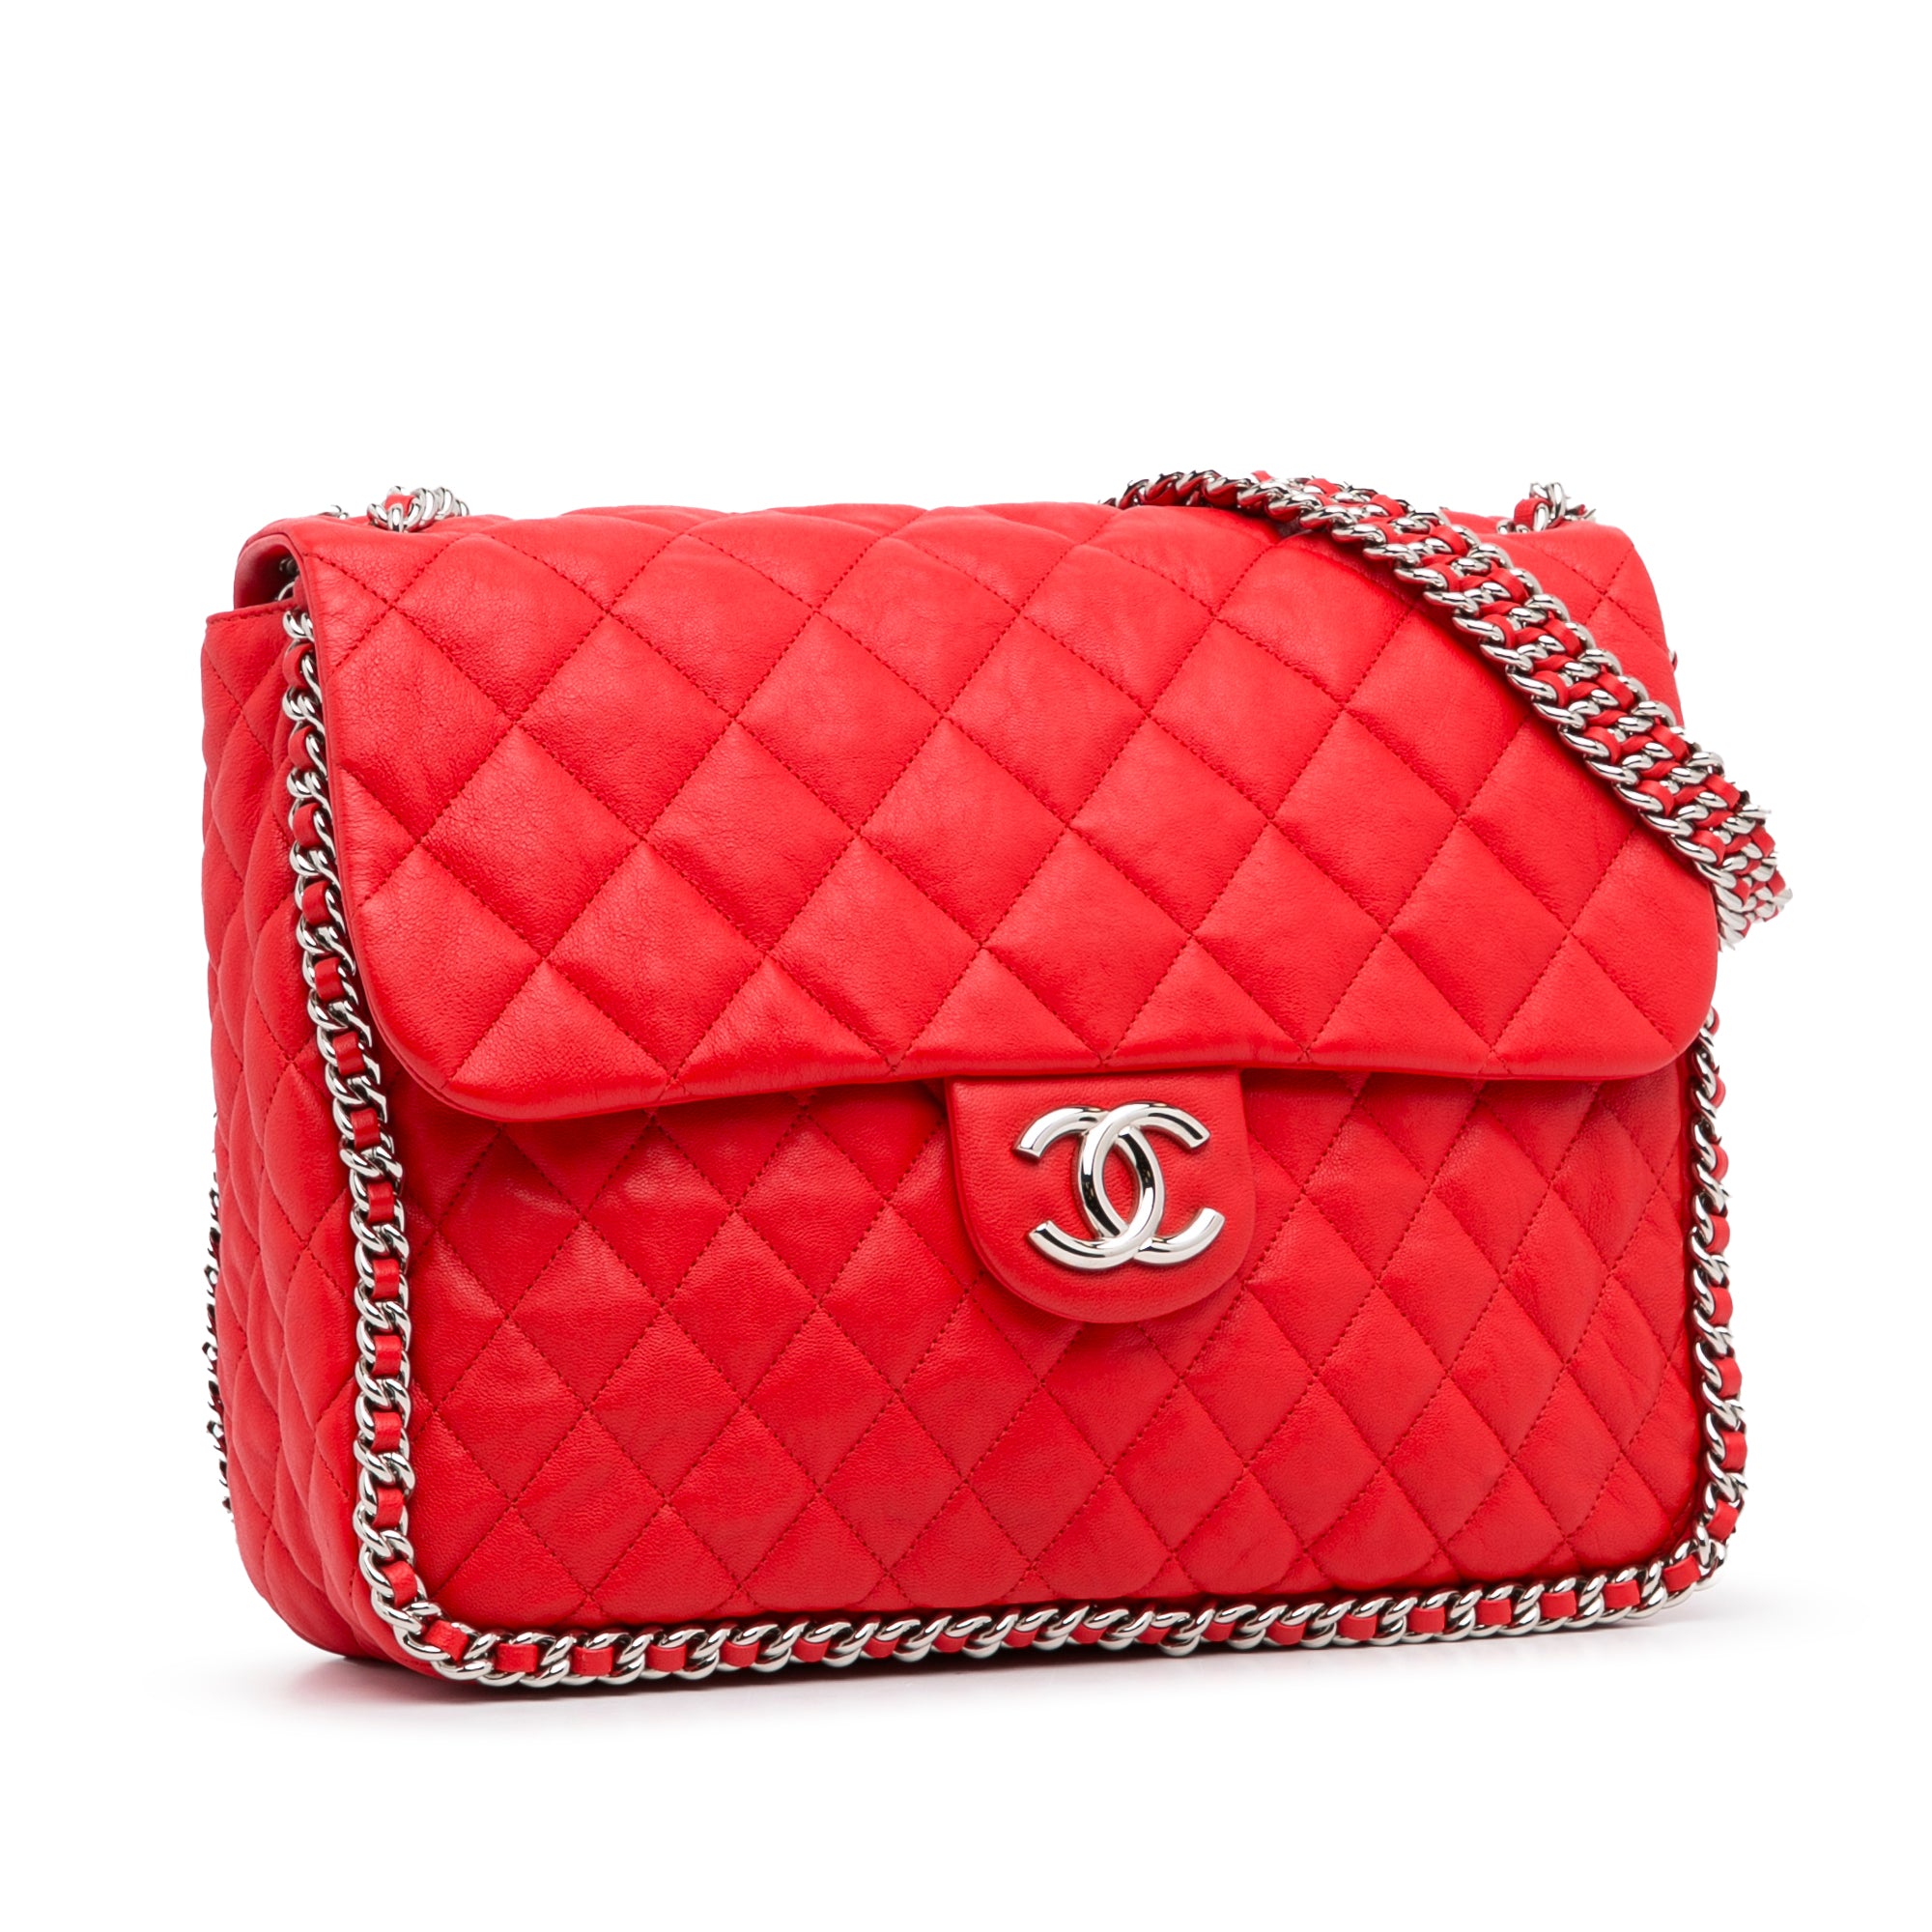 Chanel Red Quilted Lambskin Leather Classic Maxi Single Flap Bag